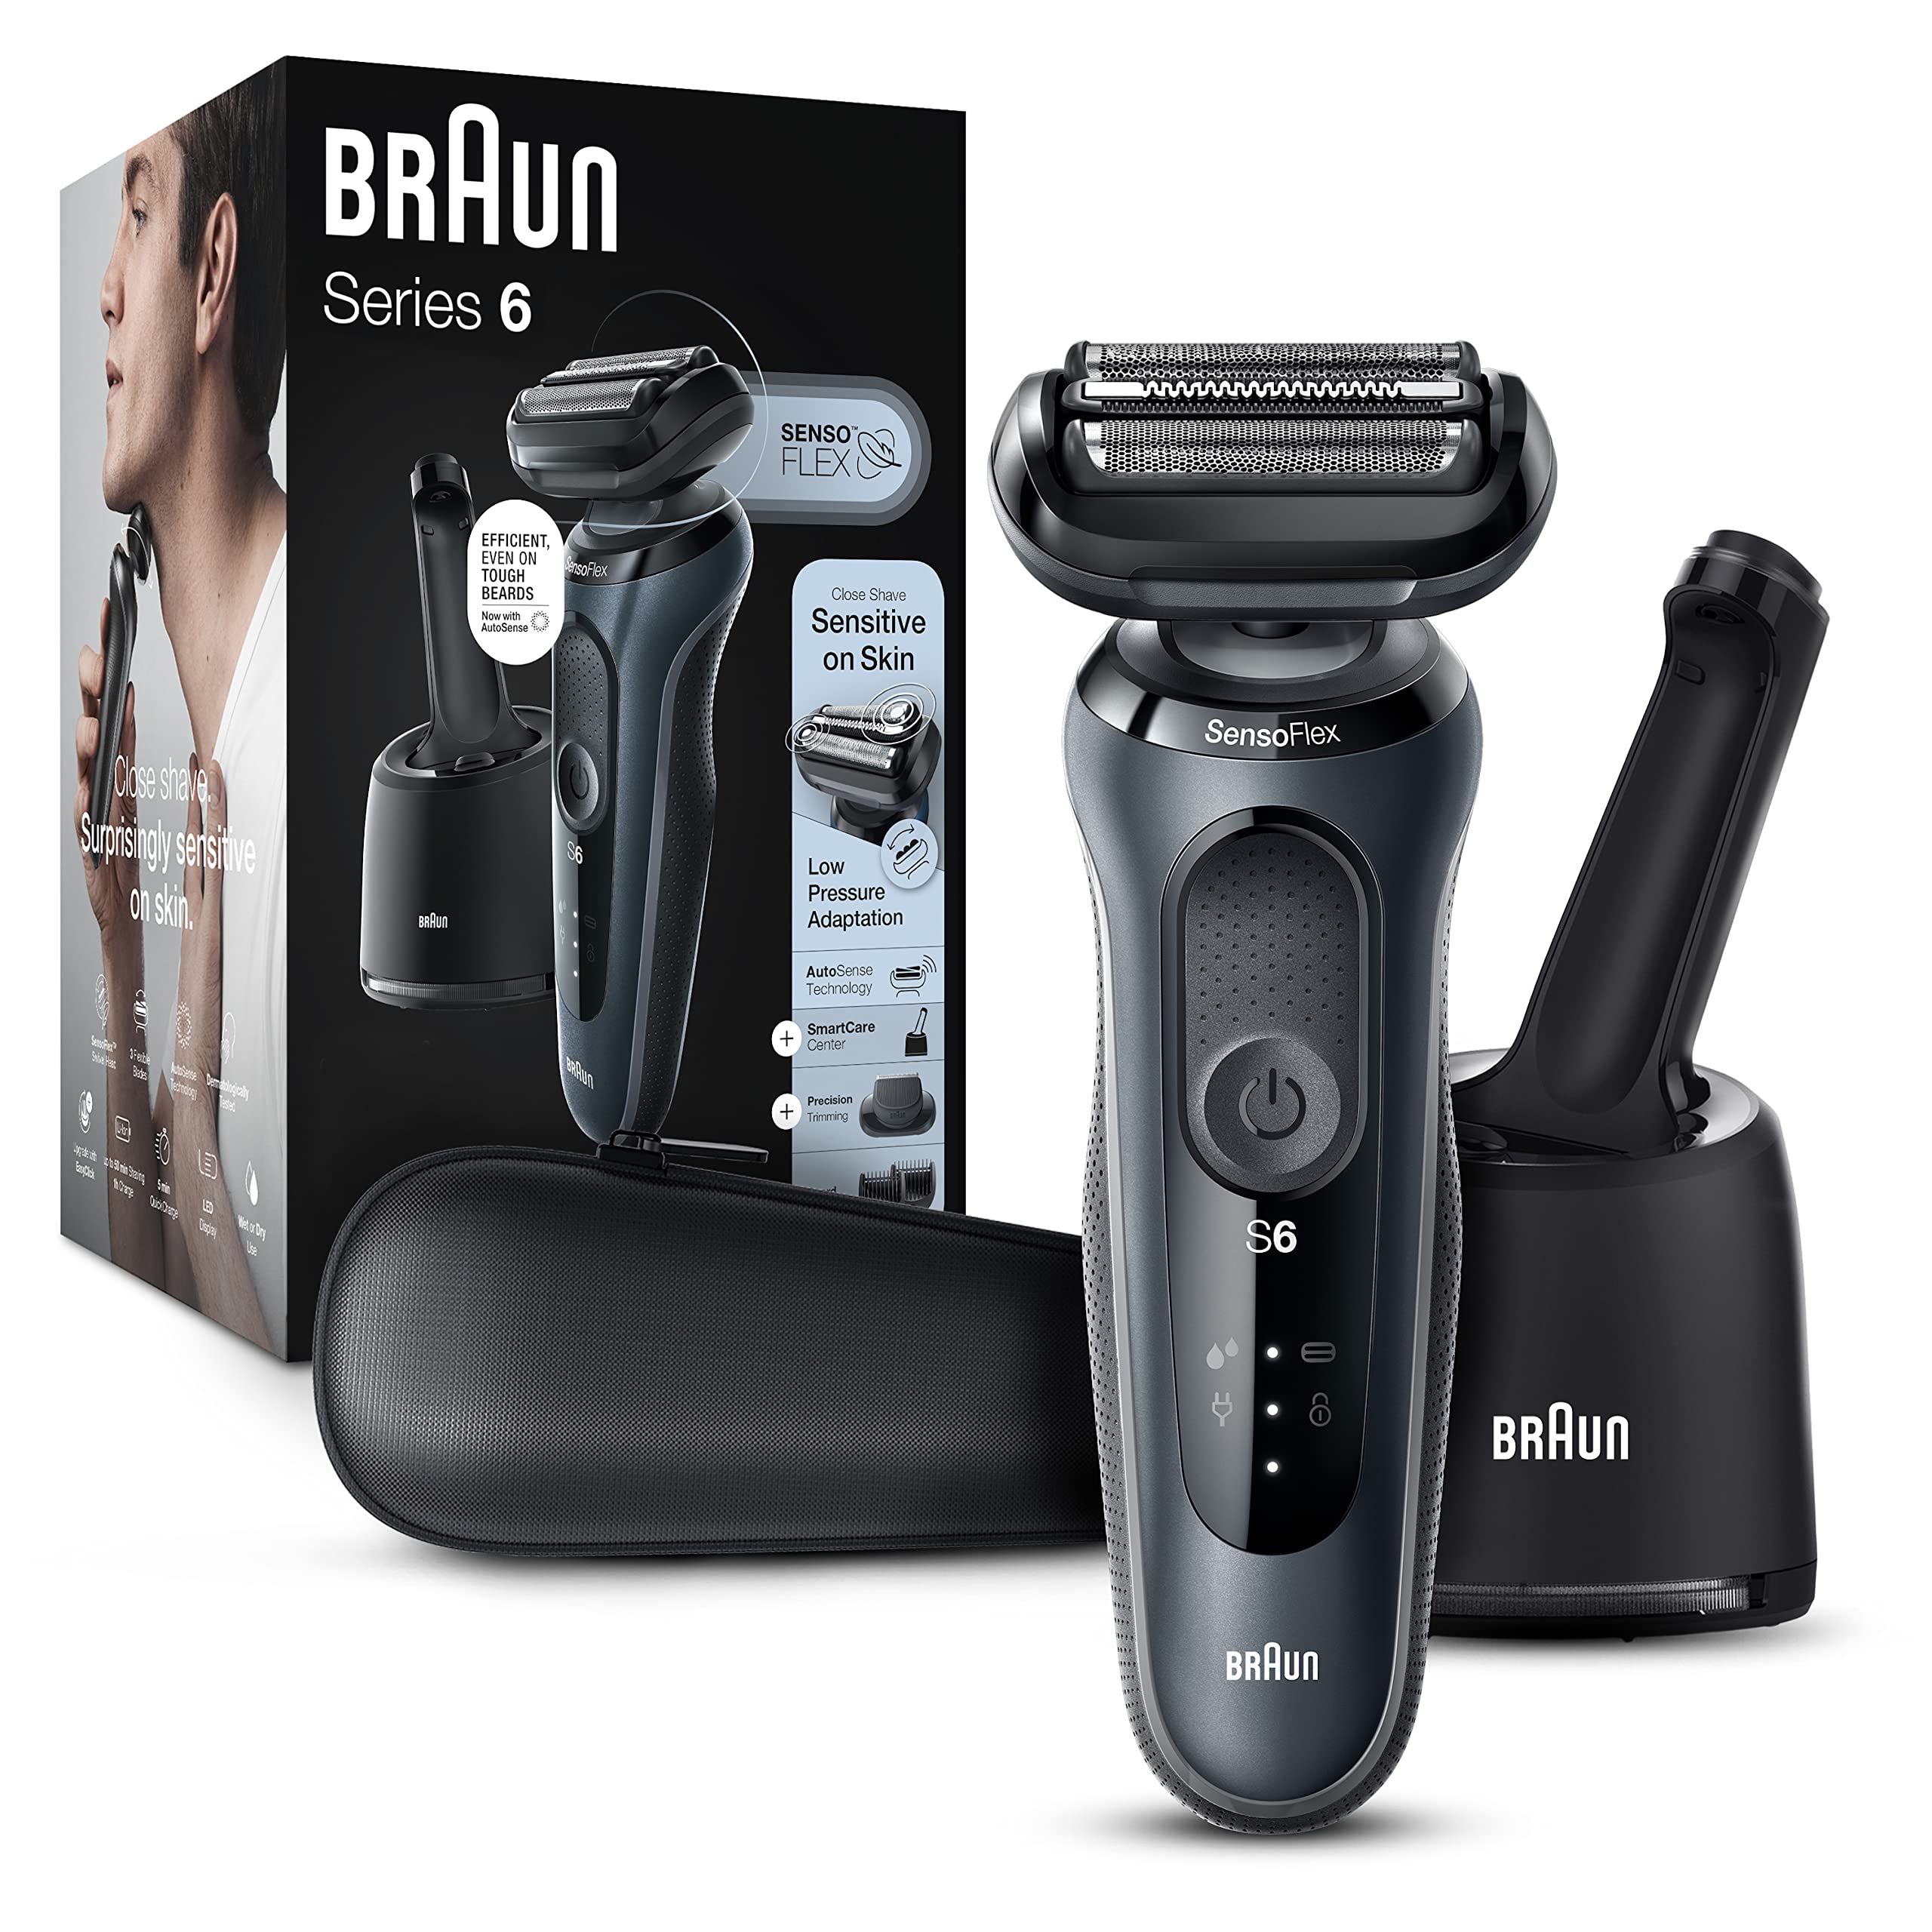 Braun Travel for Razor With Wet Black 6075cc, Shaver, & Men, ,Rechargeable, Foil Trimmer Case Leather 6 Shave, SmartCare & Waterproof Center Beard Clean Dry for and Grooming, Charge Electric Series